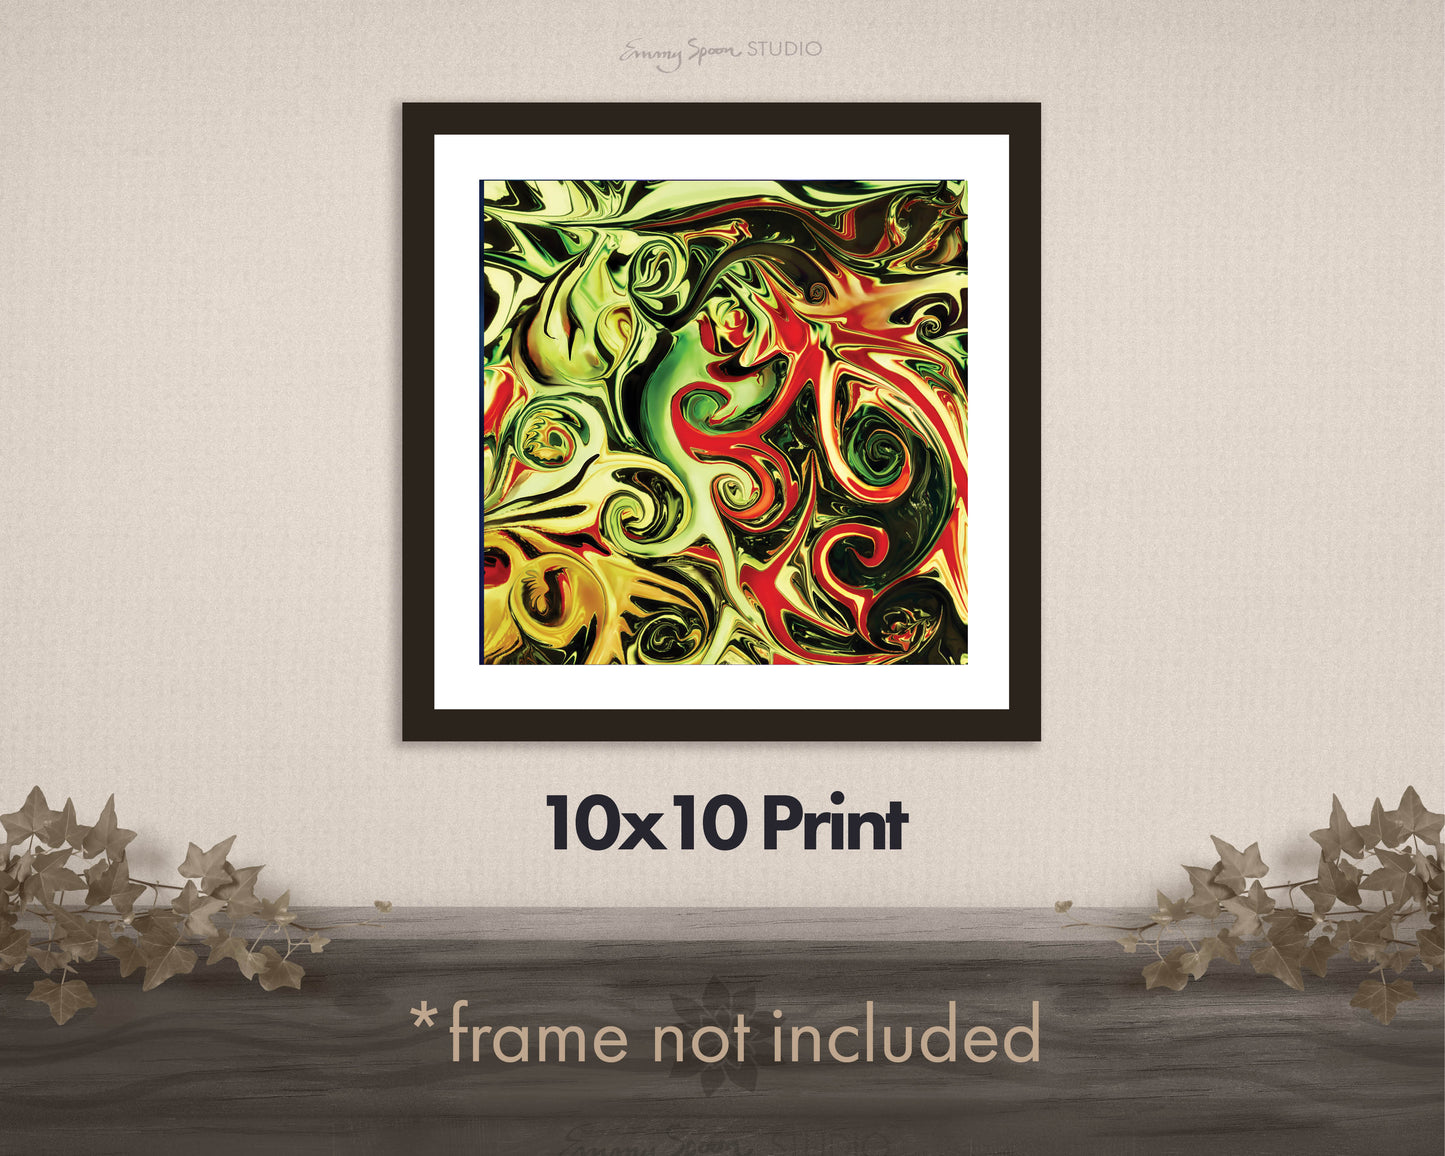 Lustre Art Print (Aging Swirl - 2014) by Emmy Spoon - 10x10 - frame not included